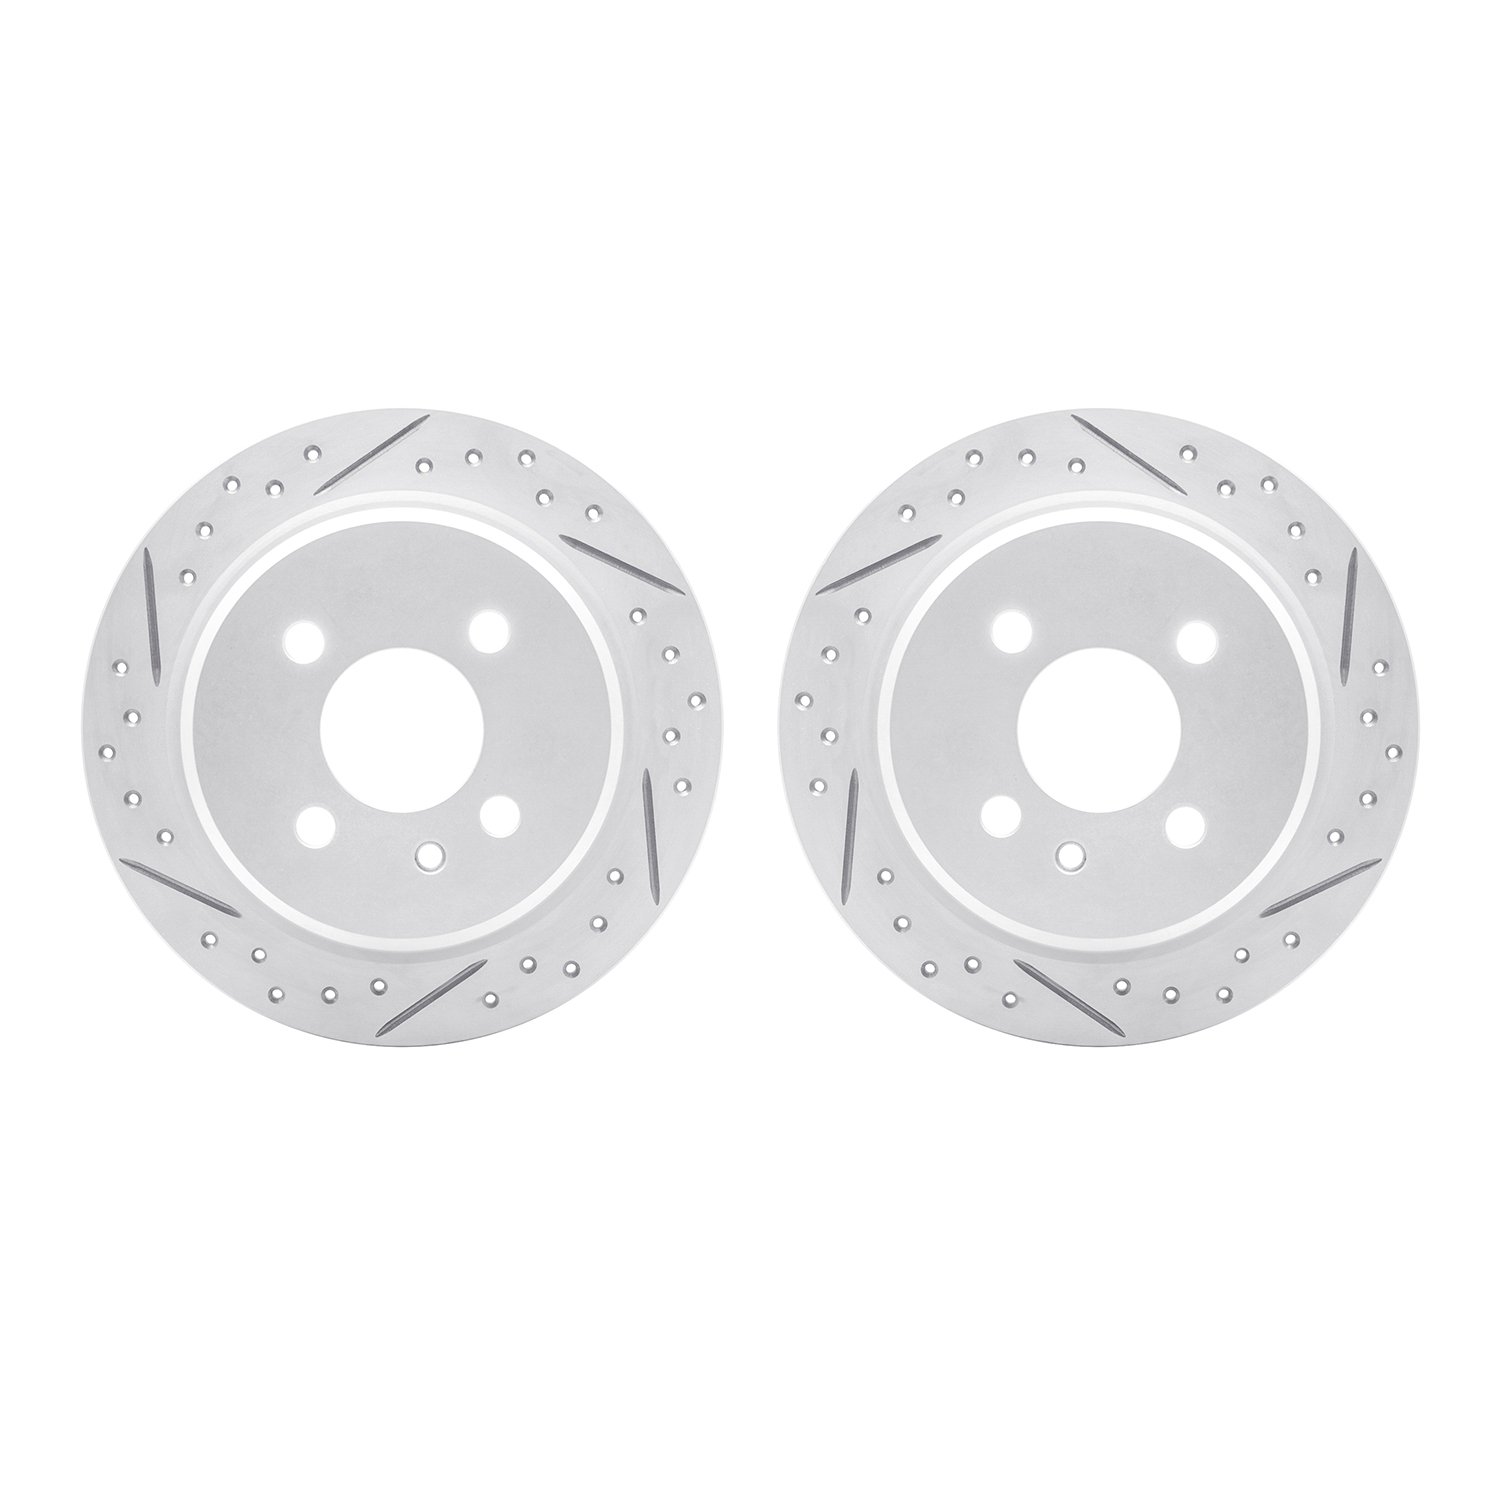 2002-31059 Geoperformance Drilled/Slotted Brake Rotors, 1984-1991 BMW, Position: Rear